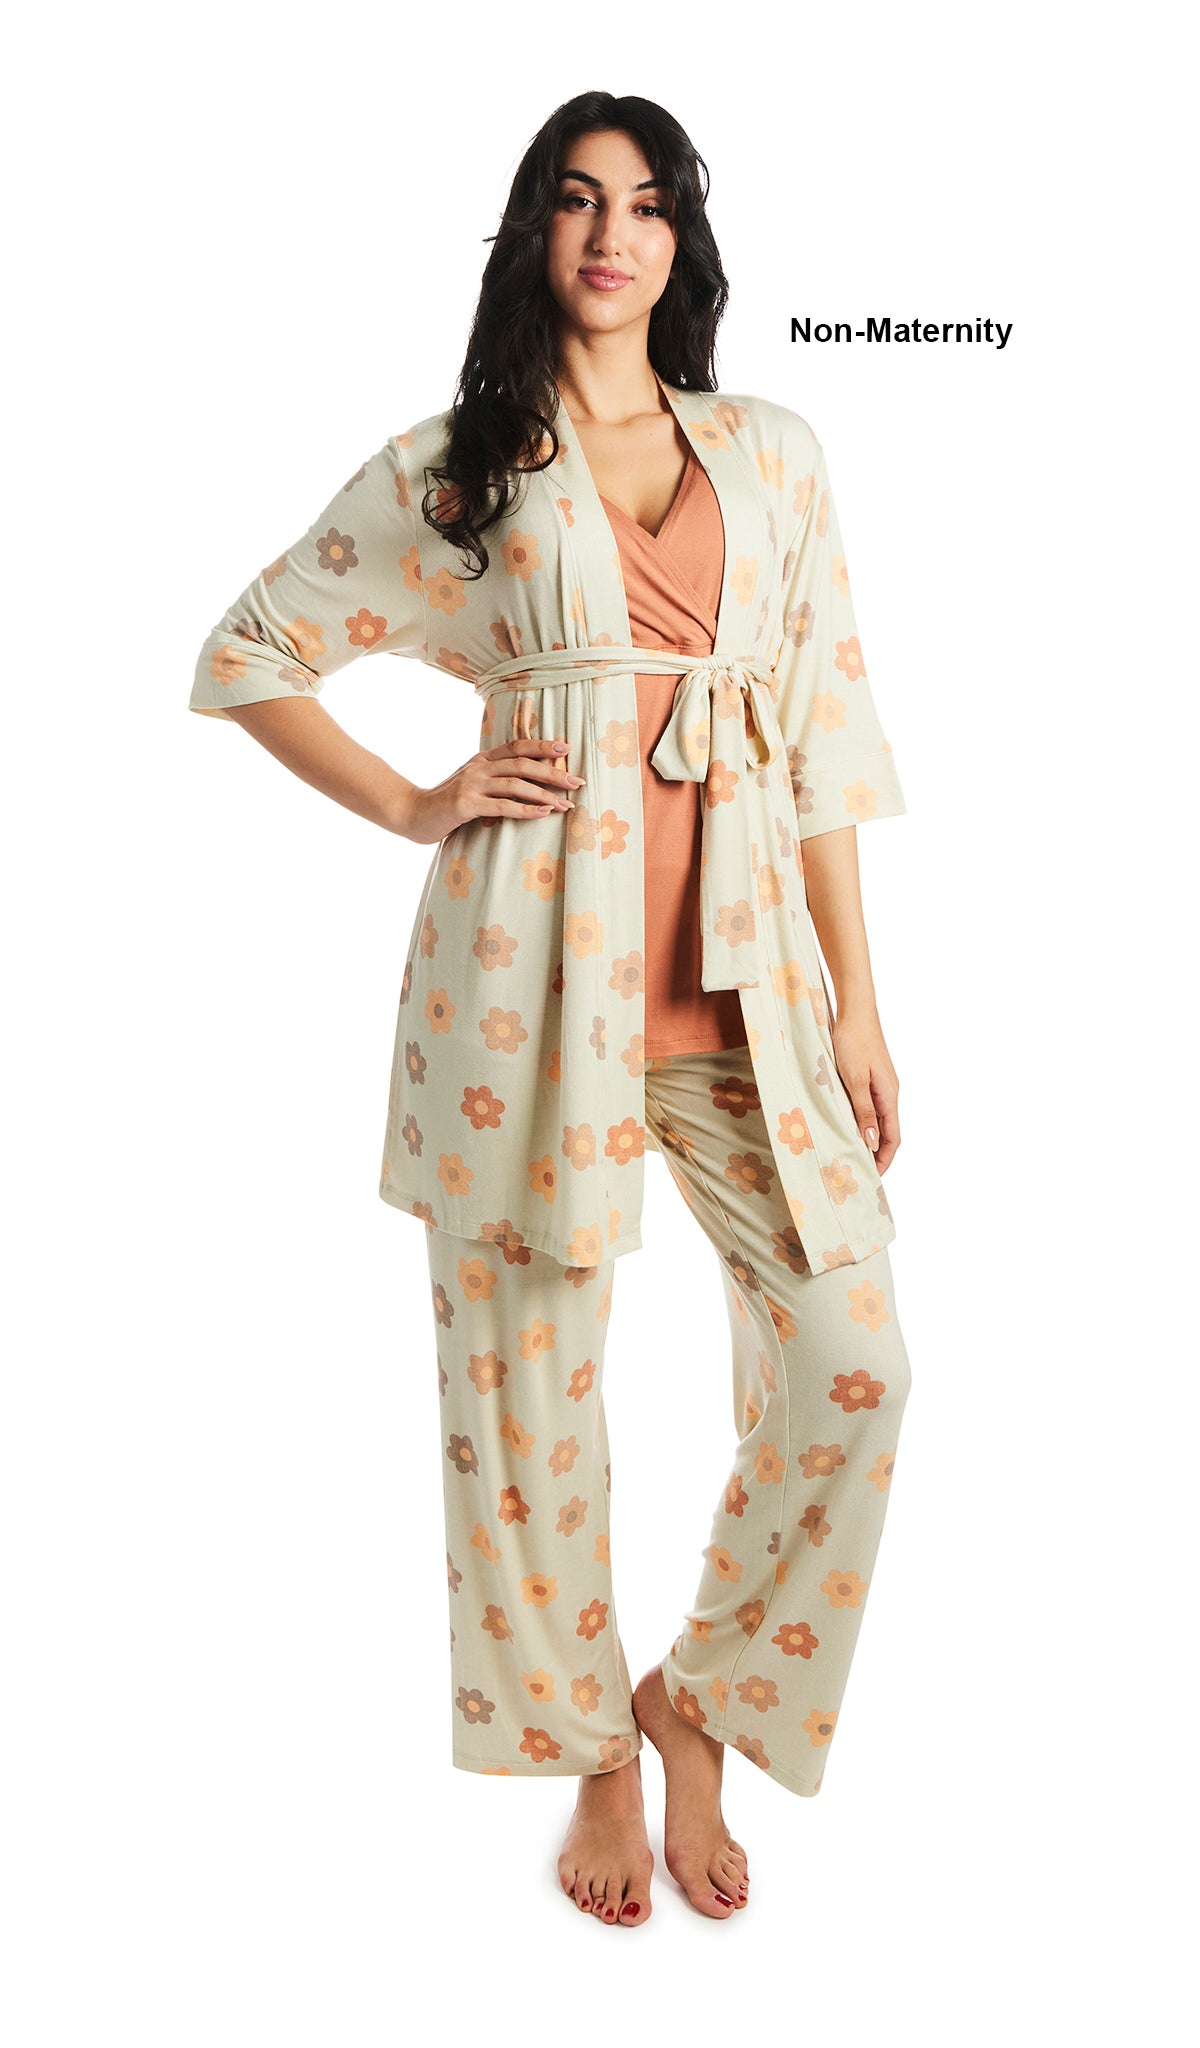 Daisies Analise 3-Piece Set. Woman with hand on hip wearing 3/4 sleeve robe, tank top and pant as non-maternity.